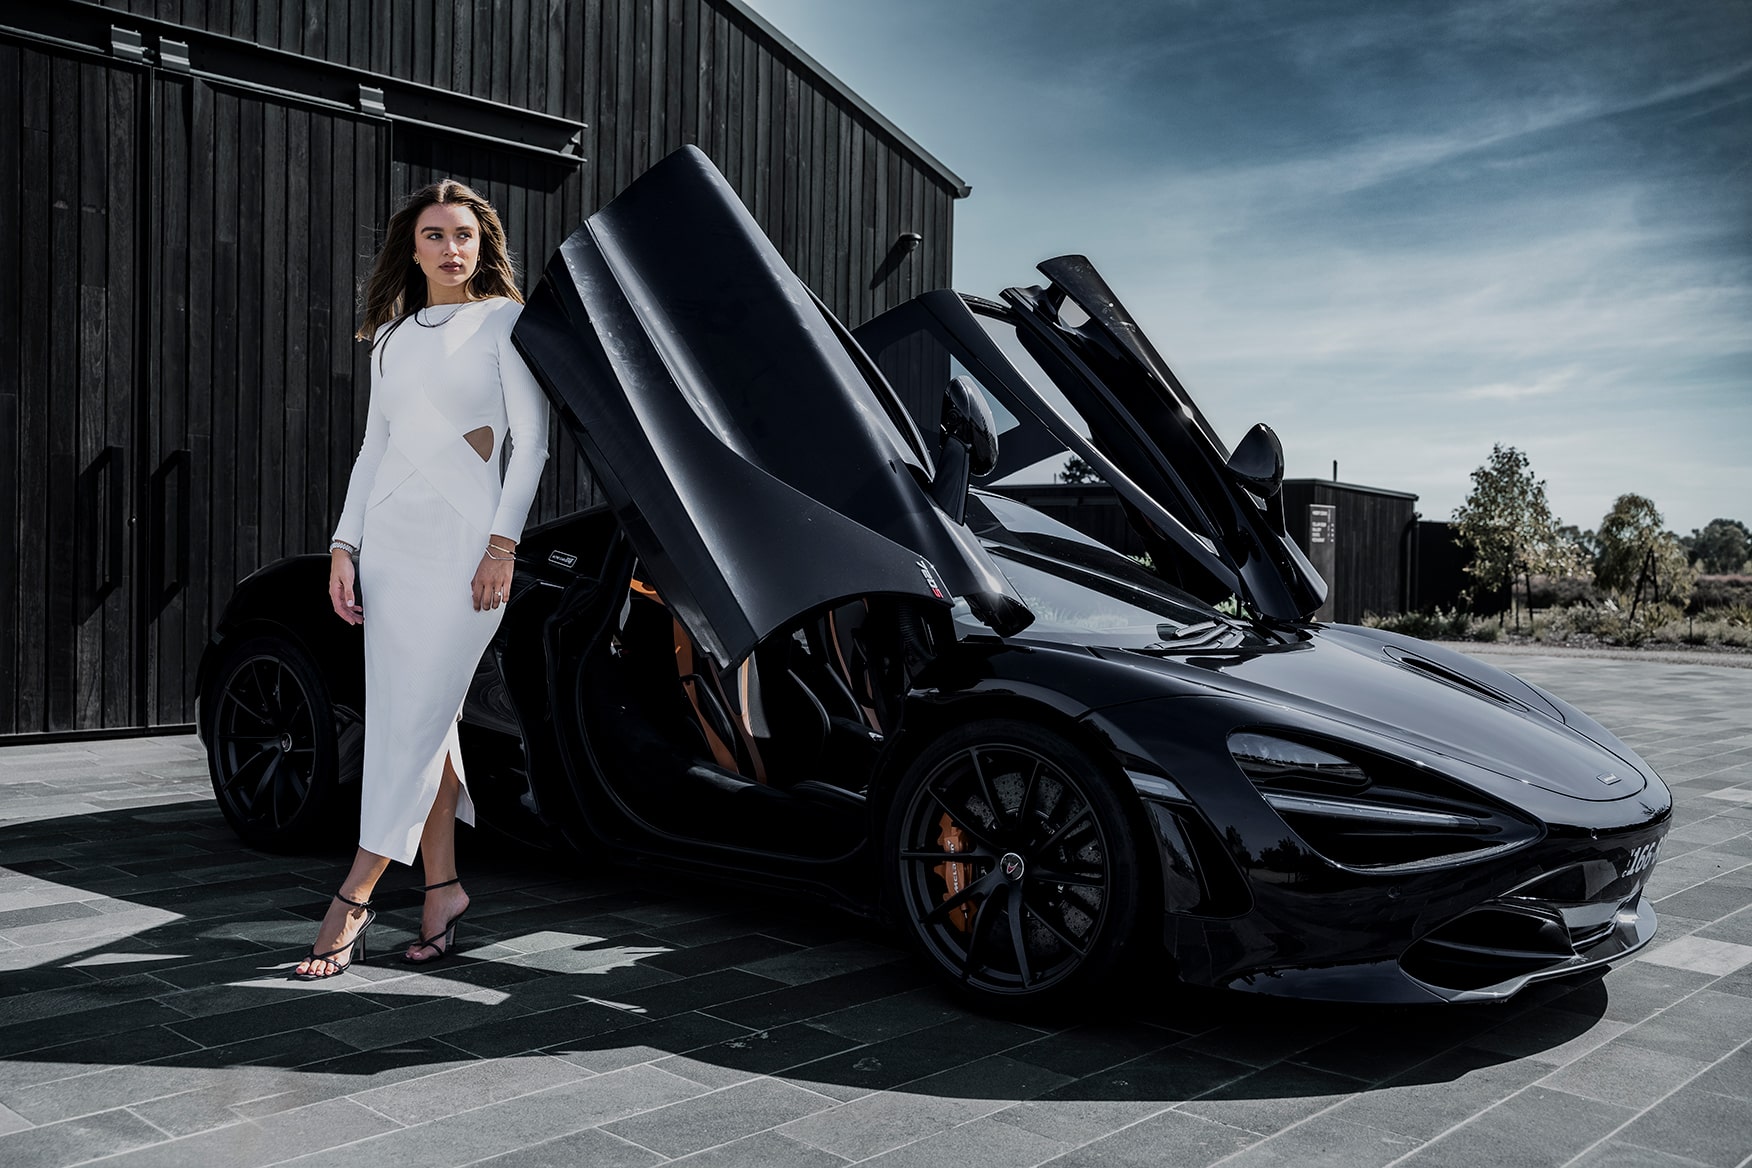 Professional Brand Promo Photographer Melbourne captures woman in white by black sports car